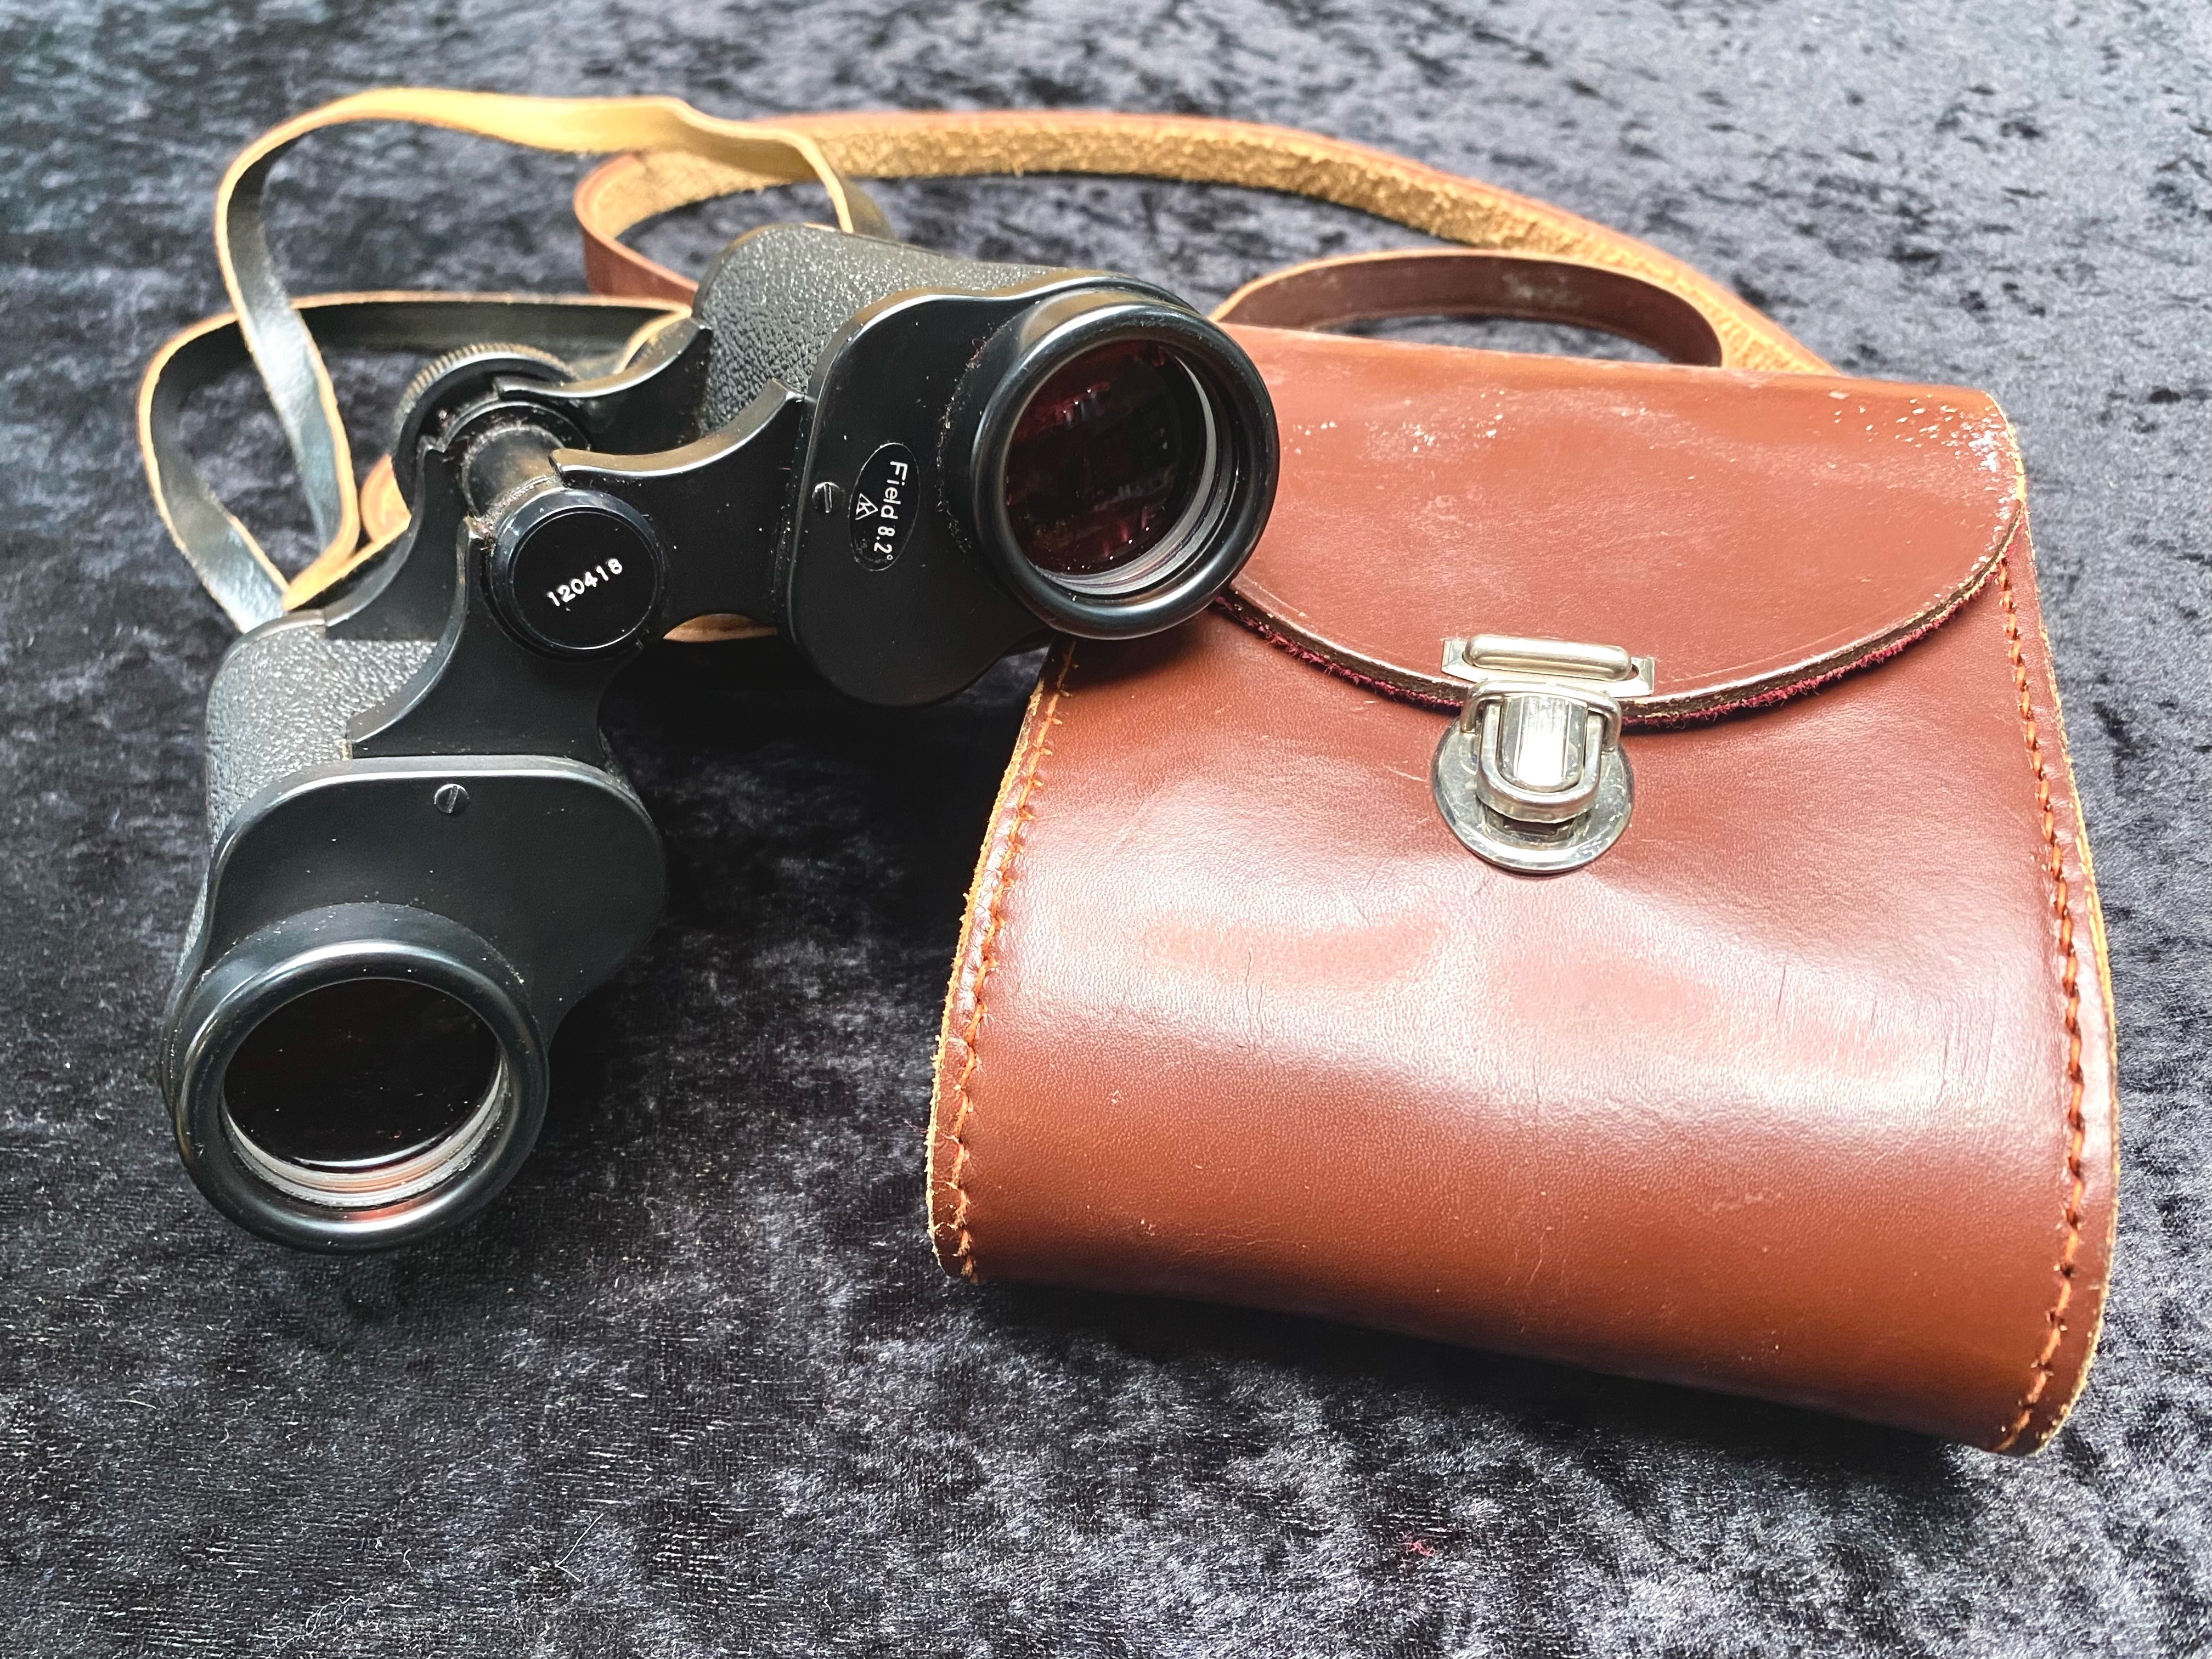 Pair of Antique WWI Octra Binoculars, No. 11054, 10 x 50. Strong leather case, red lining. Good